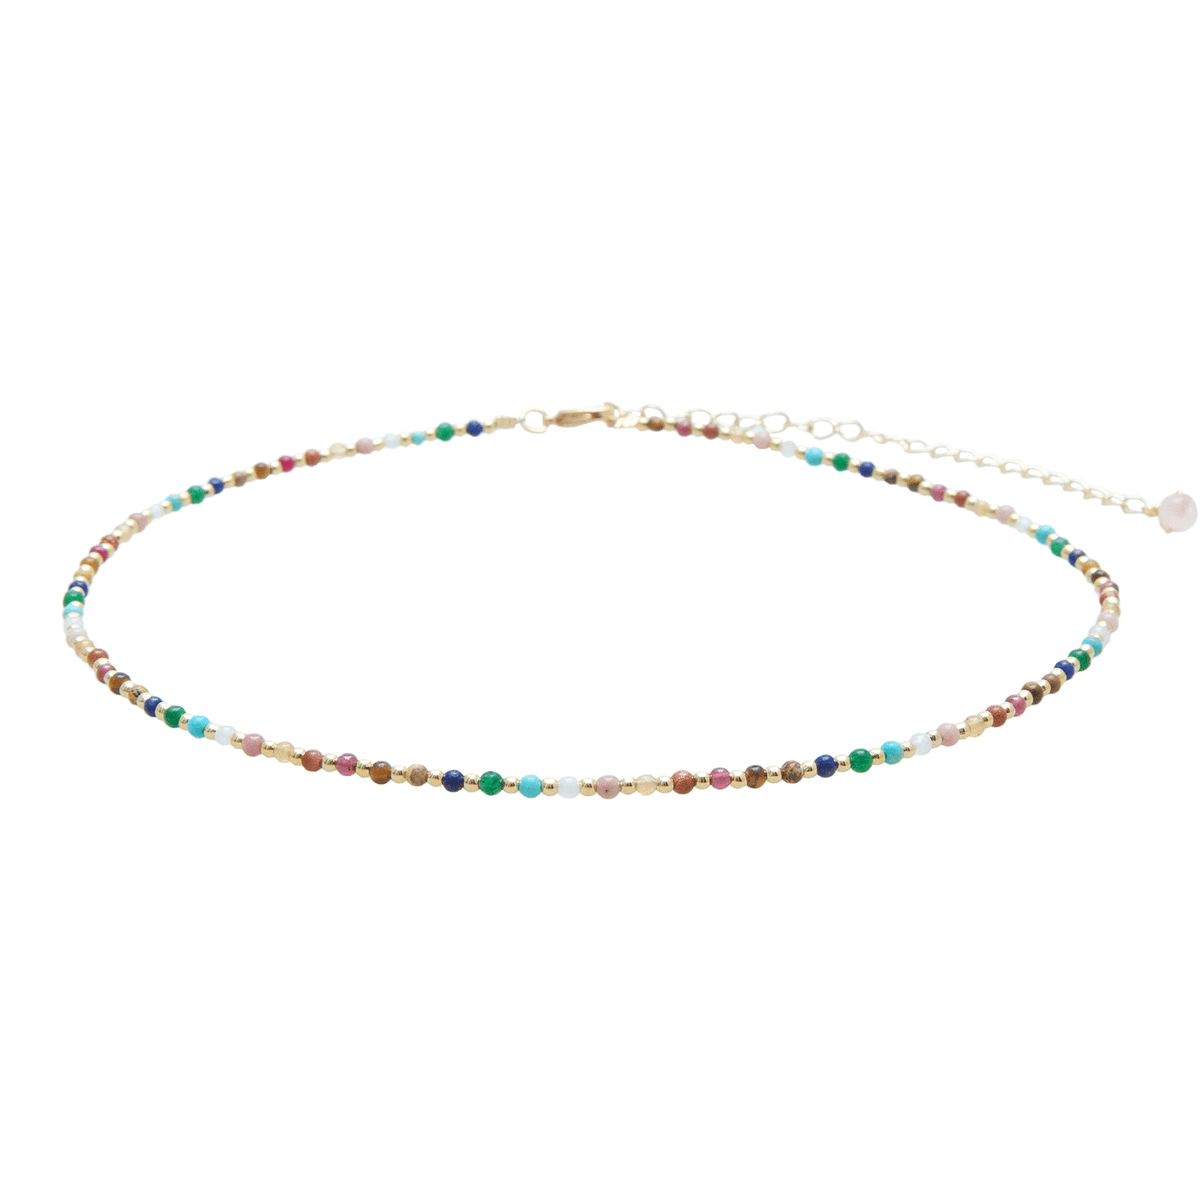 2mm multicolor stone and gold bead healing necklace